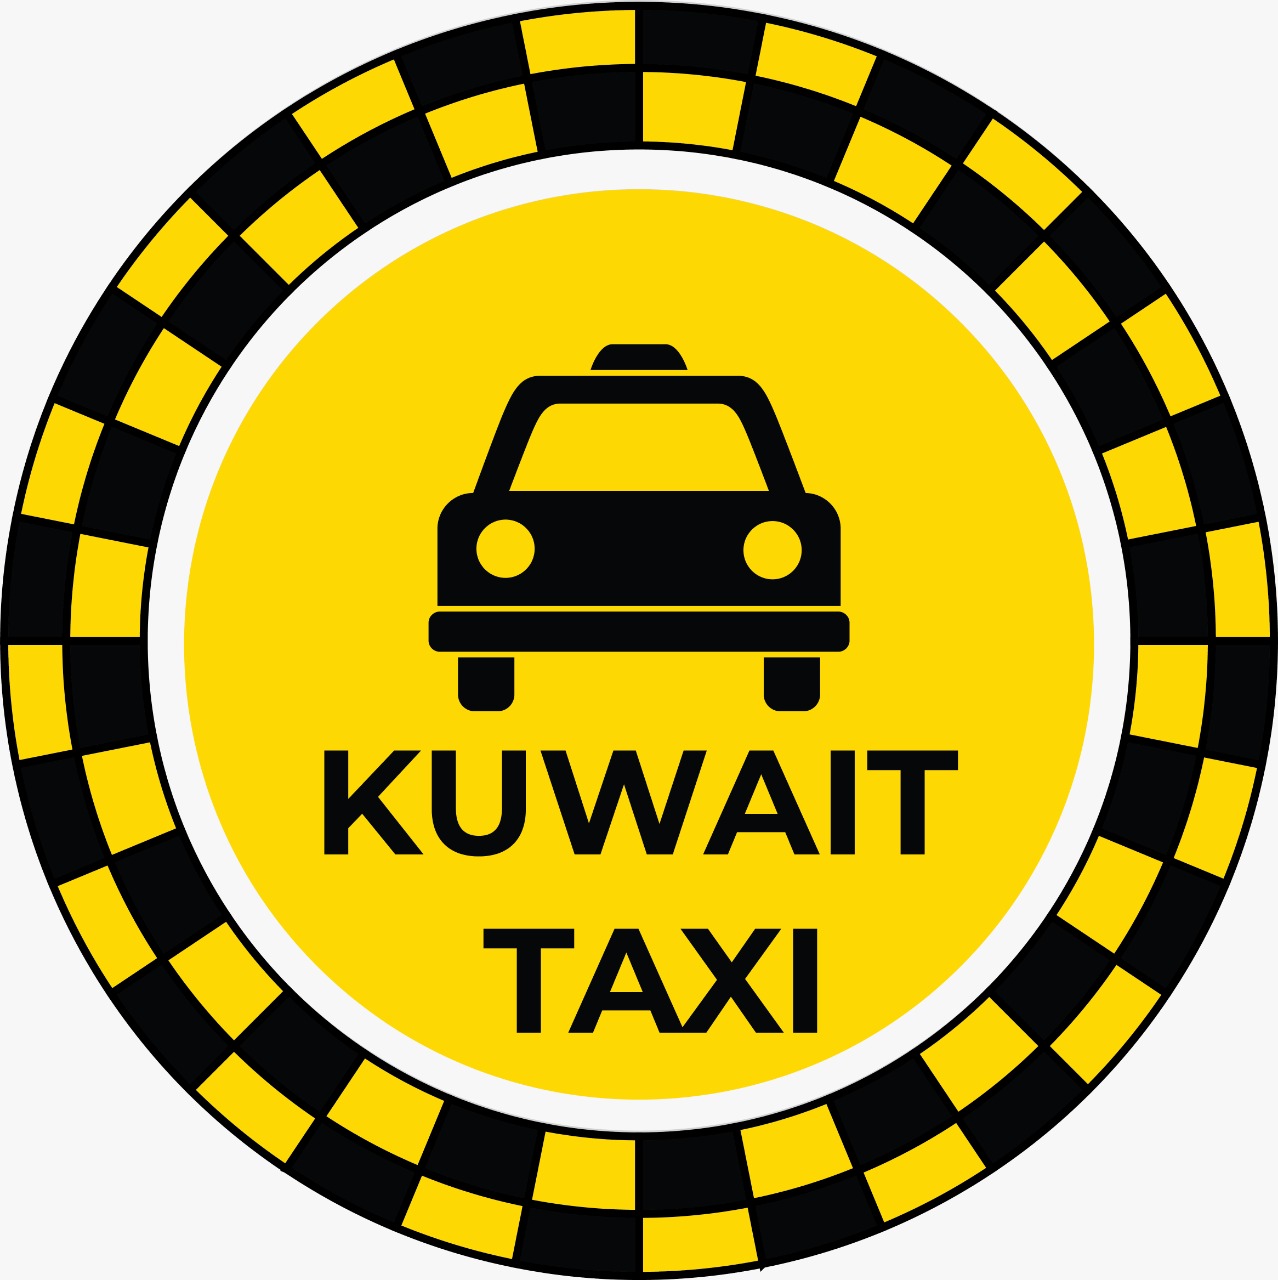 South Surra Taxi Number / Taxi in Surra Kuwait